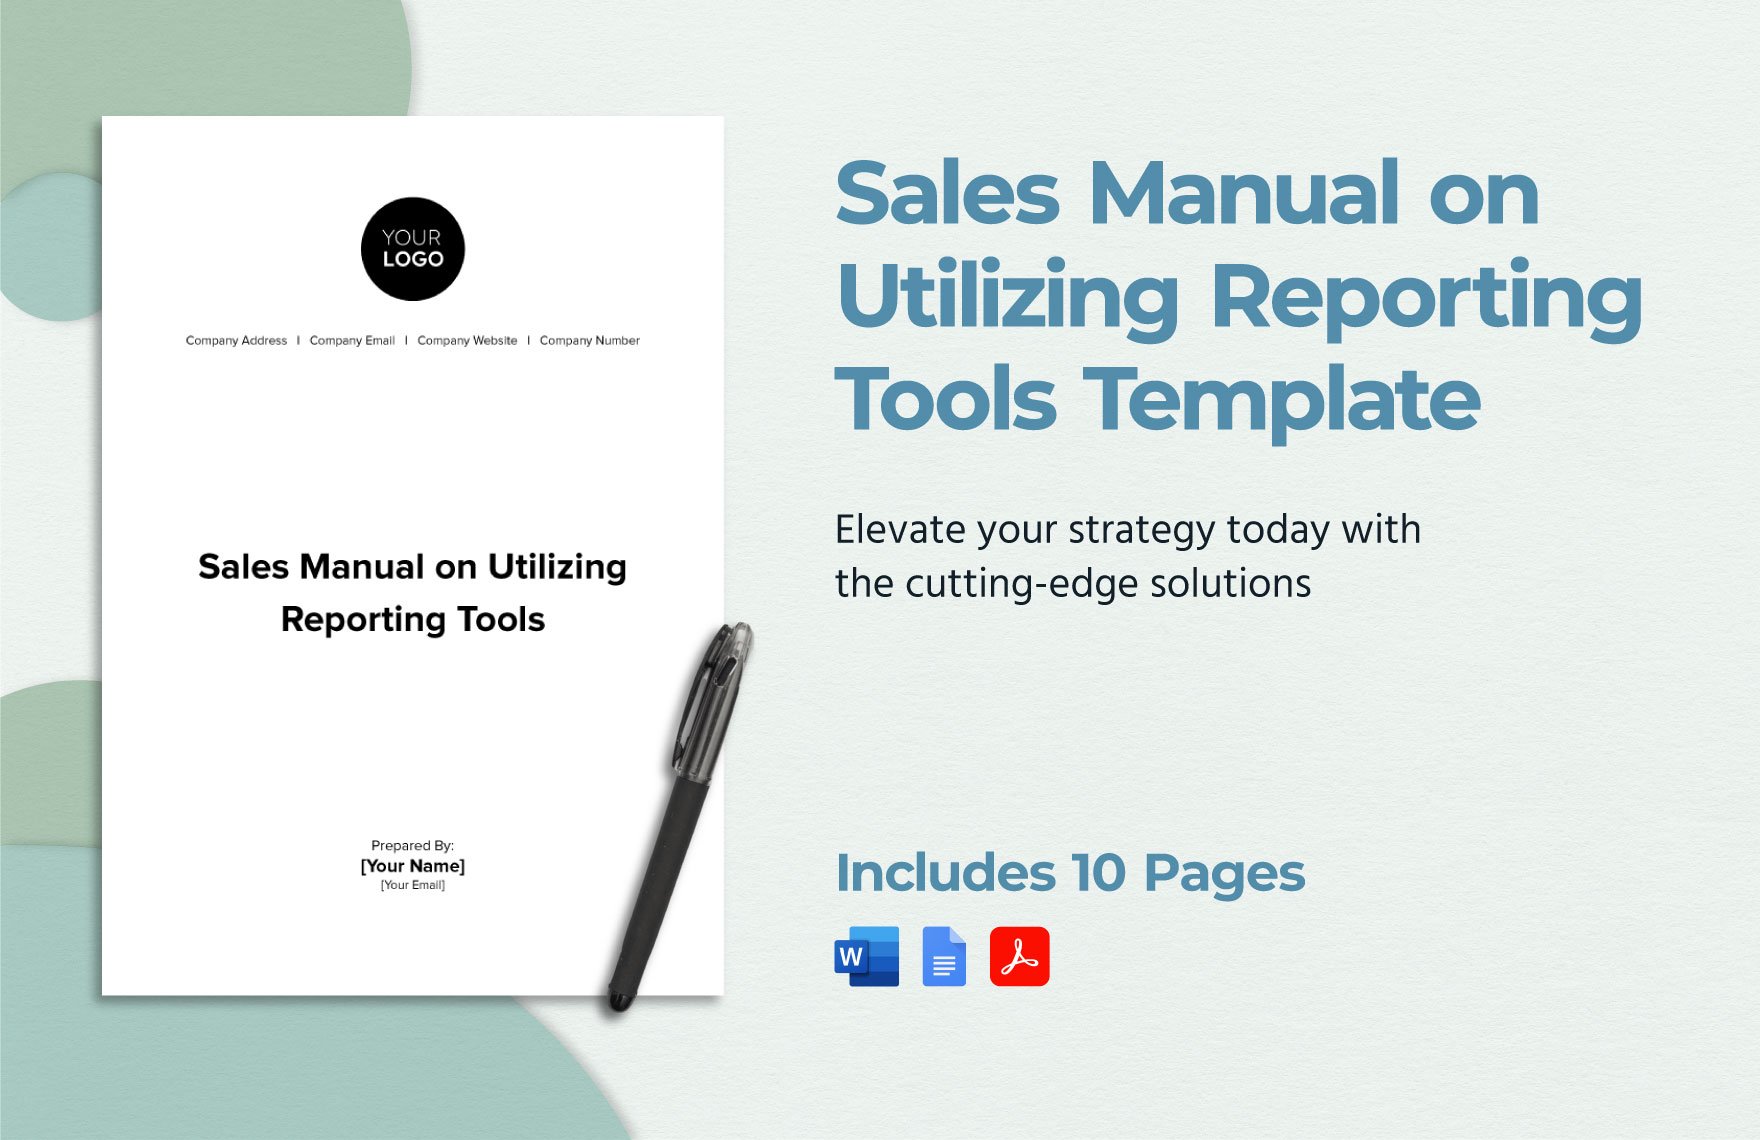 Sales Manual on Utilizing Reporting Tools Template